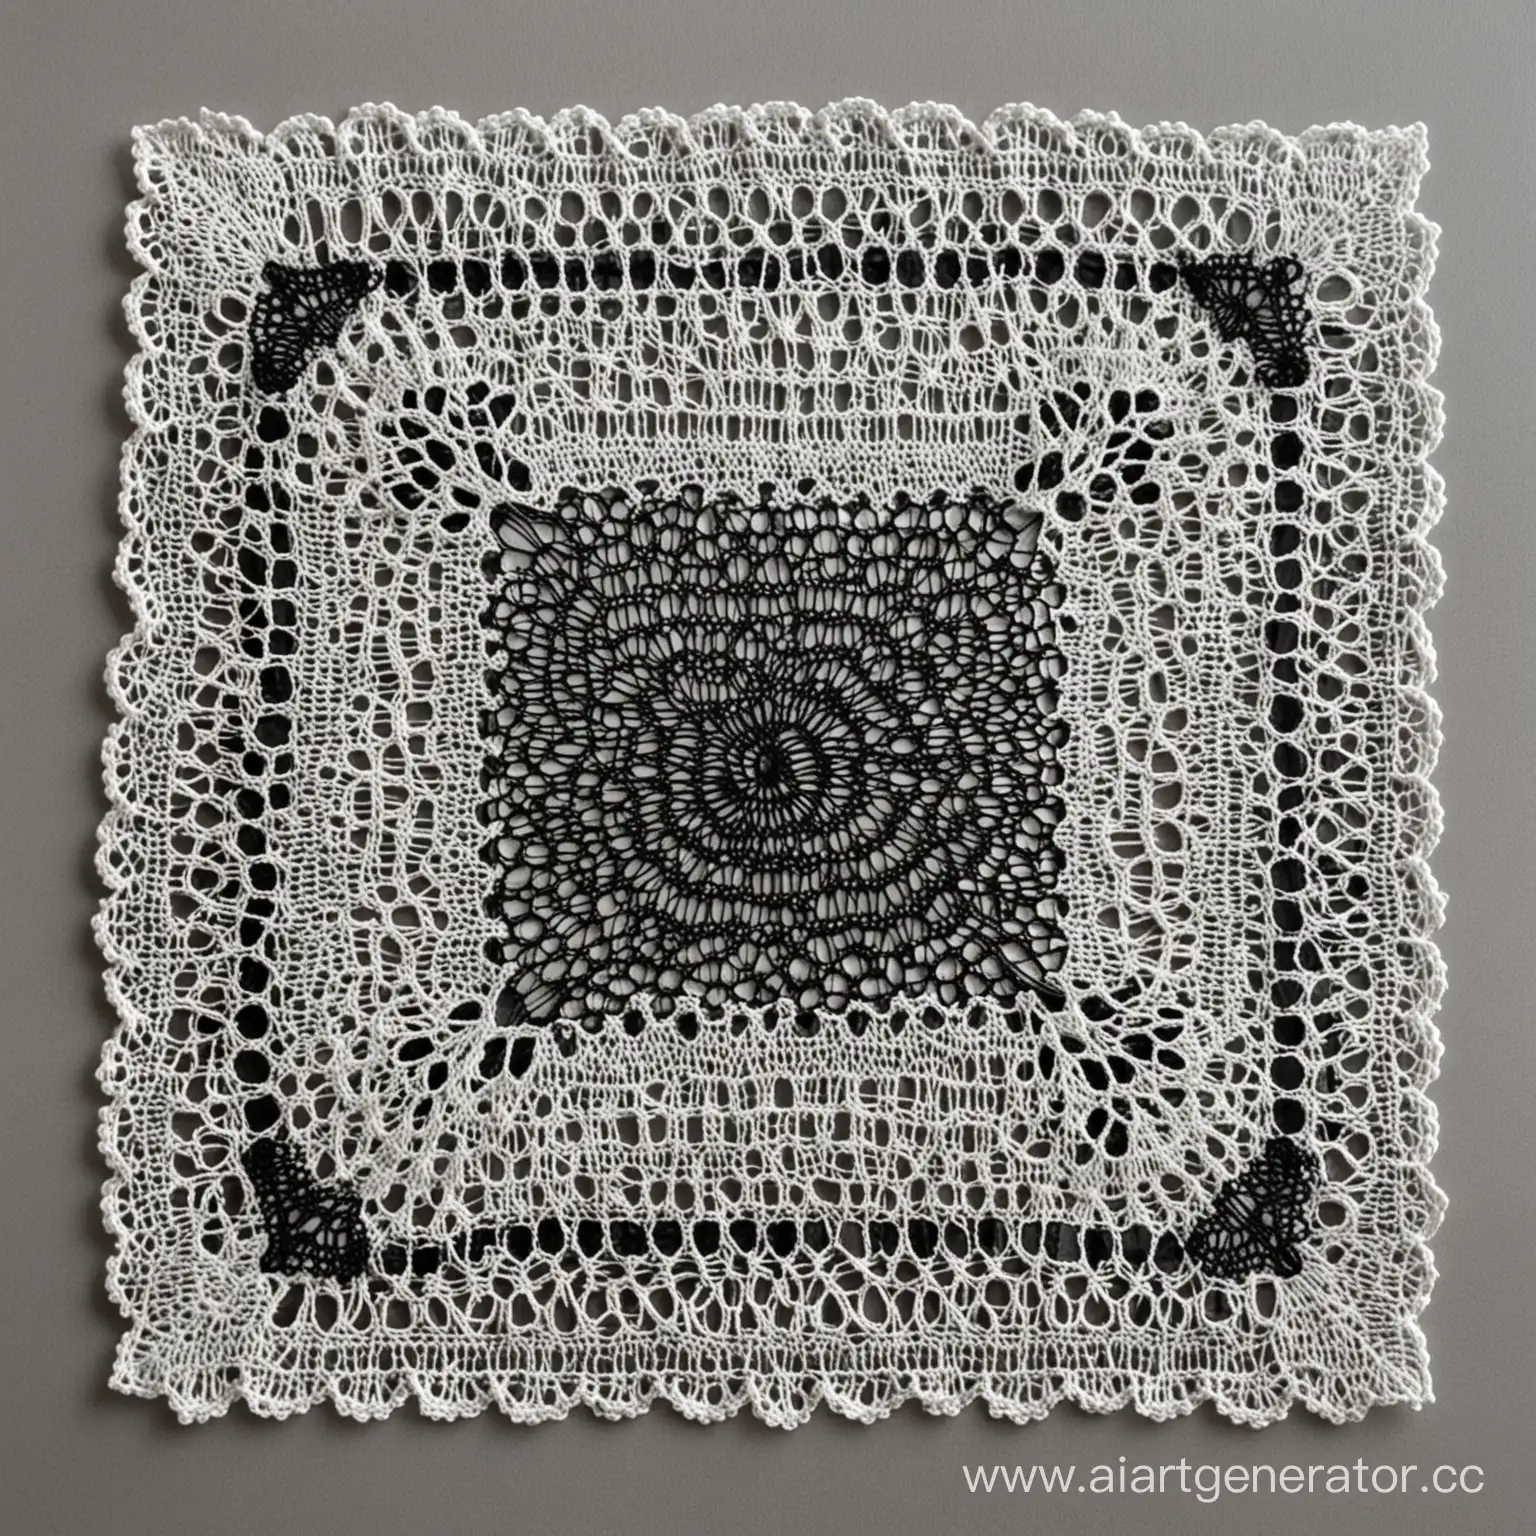 Handcrafted-Black-Crochet-Lace-Square-Napkin-on-Light-Gray-Background